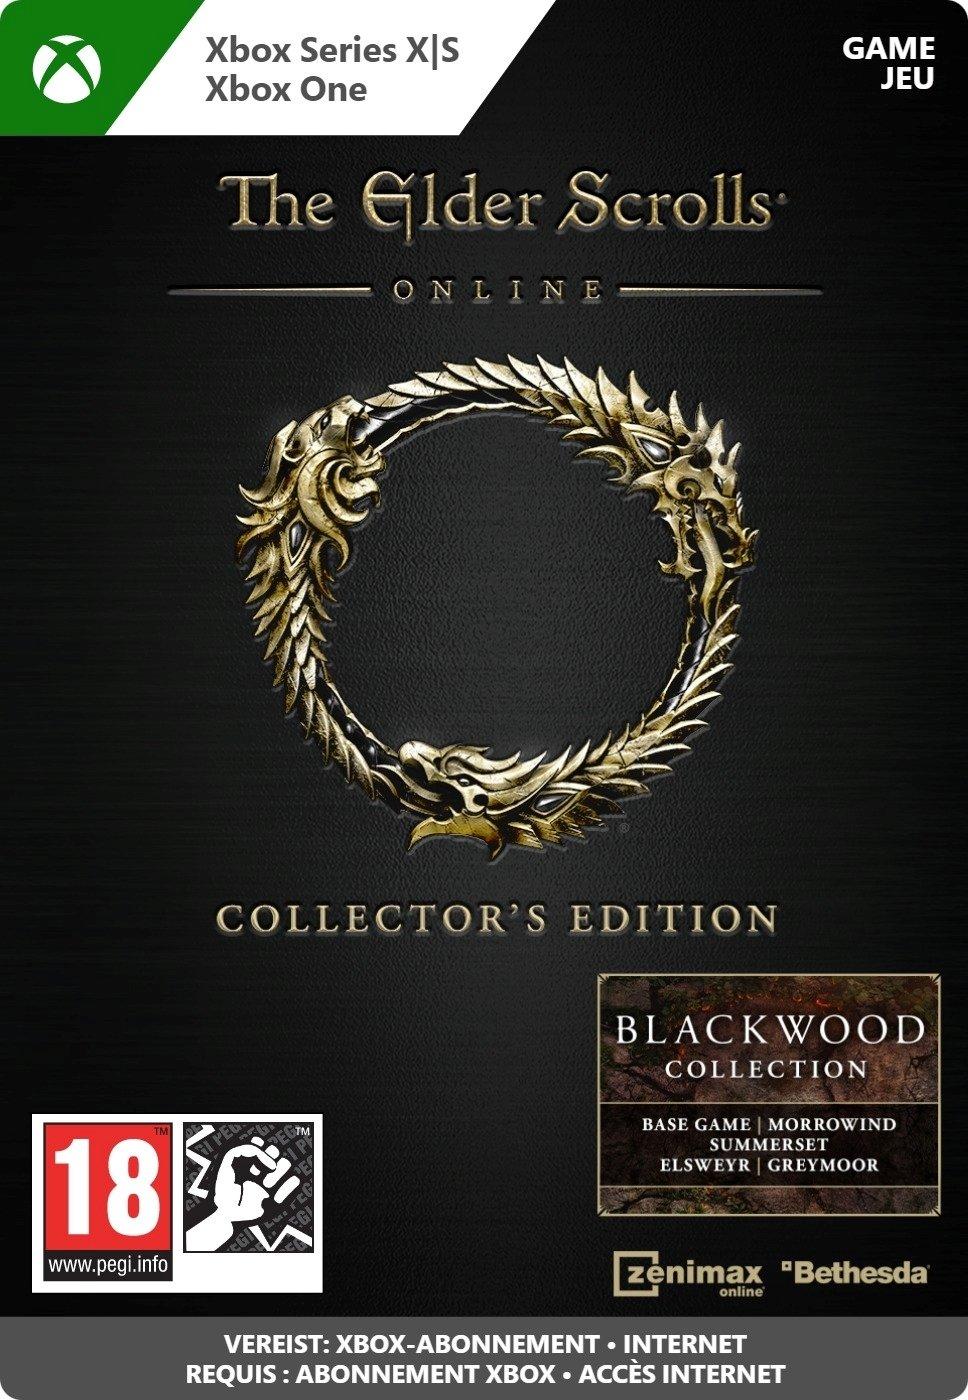 The Elder Scrolls Online Collection: Blackwood Collector's Edition - Xbox Series X/Xbox One - Ga | G7Q-00153 (f4808be4-e01d-5e4e-a9a1-4c0c51b5c6d0)